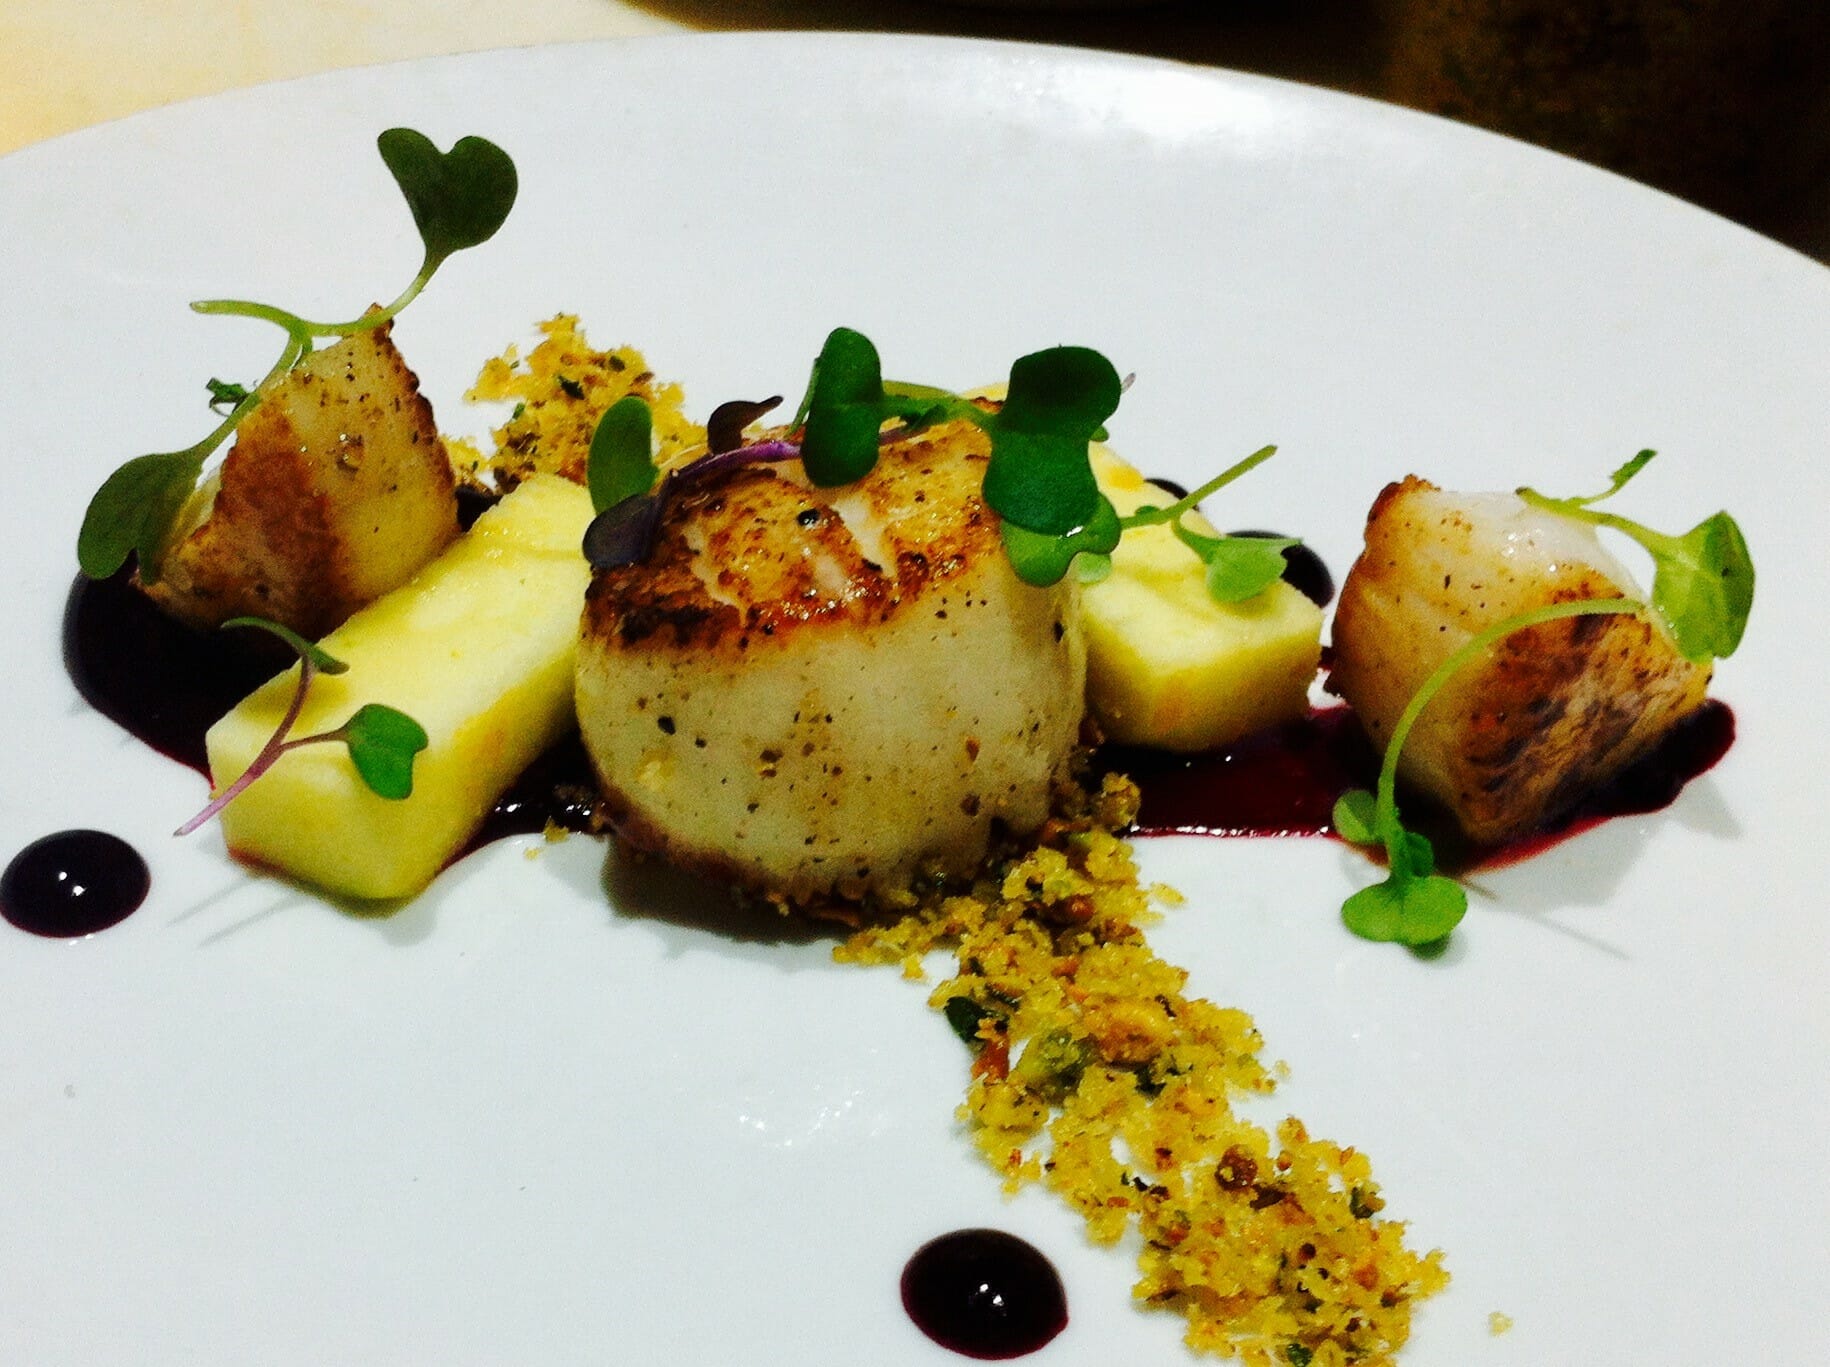 Seared Scallops with Port Wine Beer Purée, Compressed Apple, Grated Walnut and Micro Broccoli